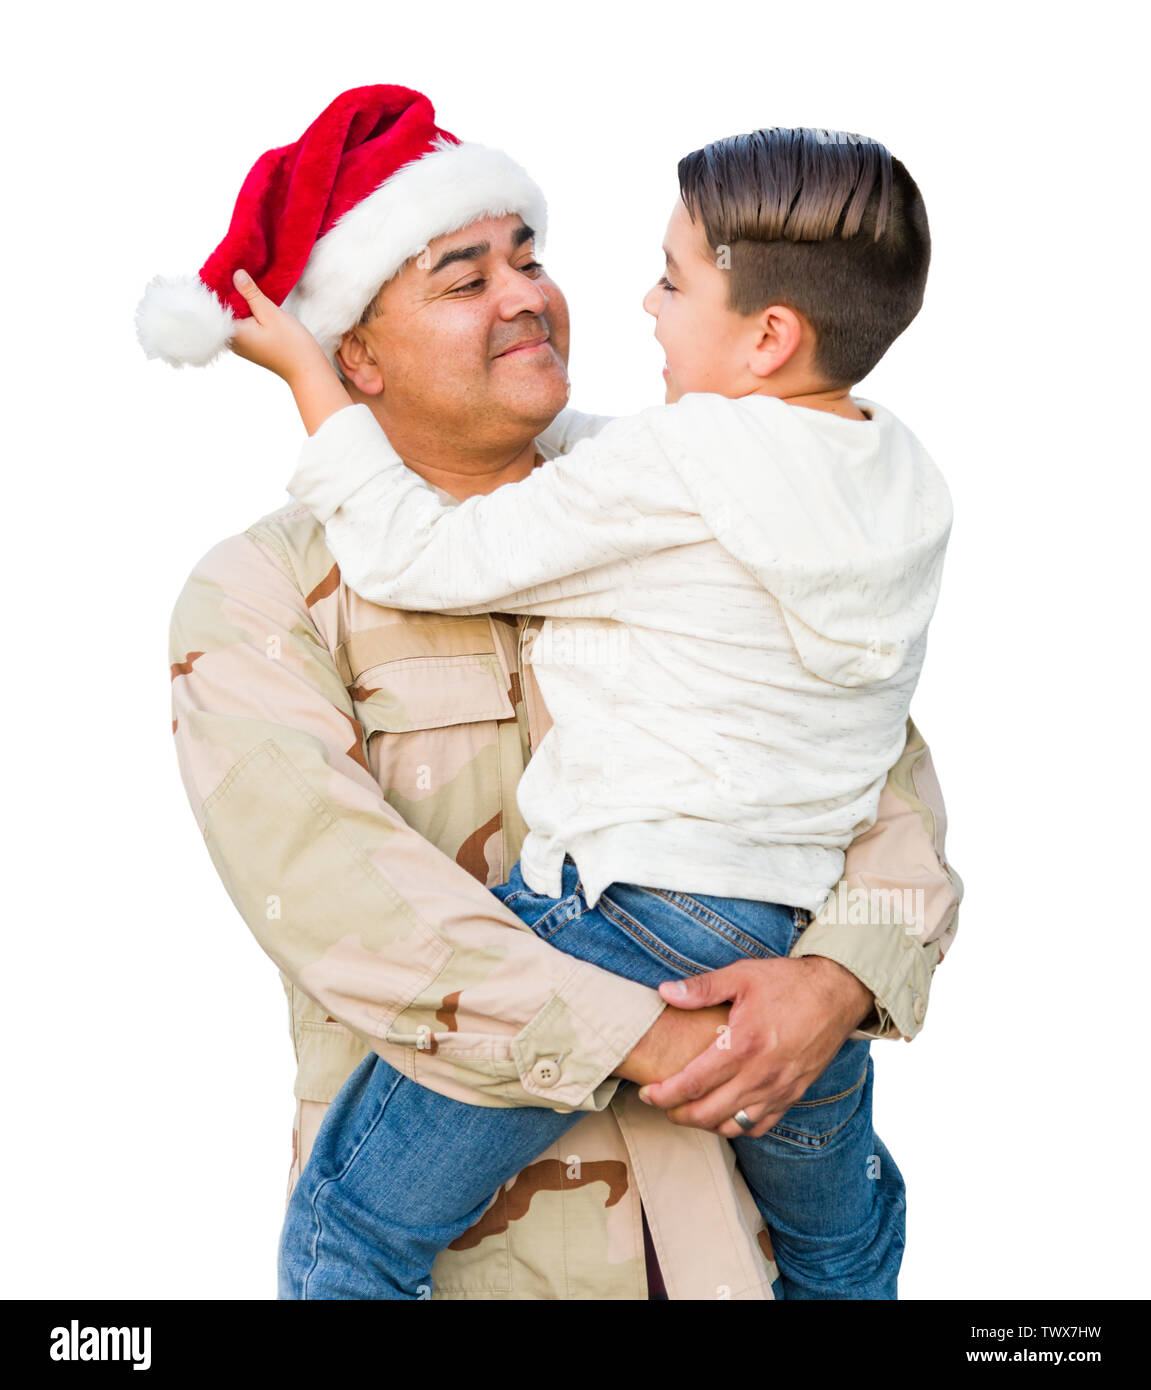 Hispanic Male Soldier Wearing Santa Cap Holding Mixed Race Son Isolated on a White Background. Stock Photo